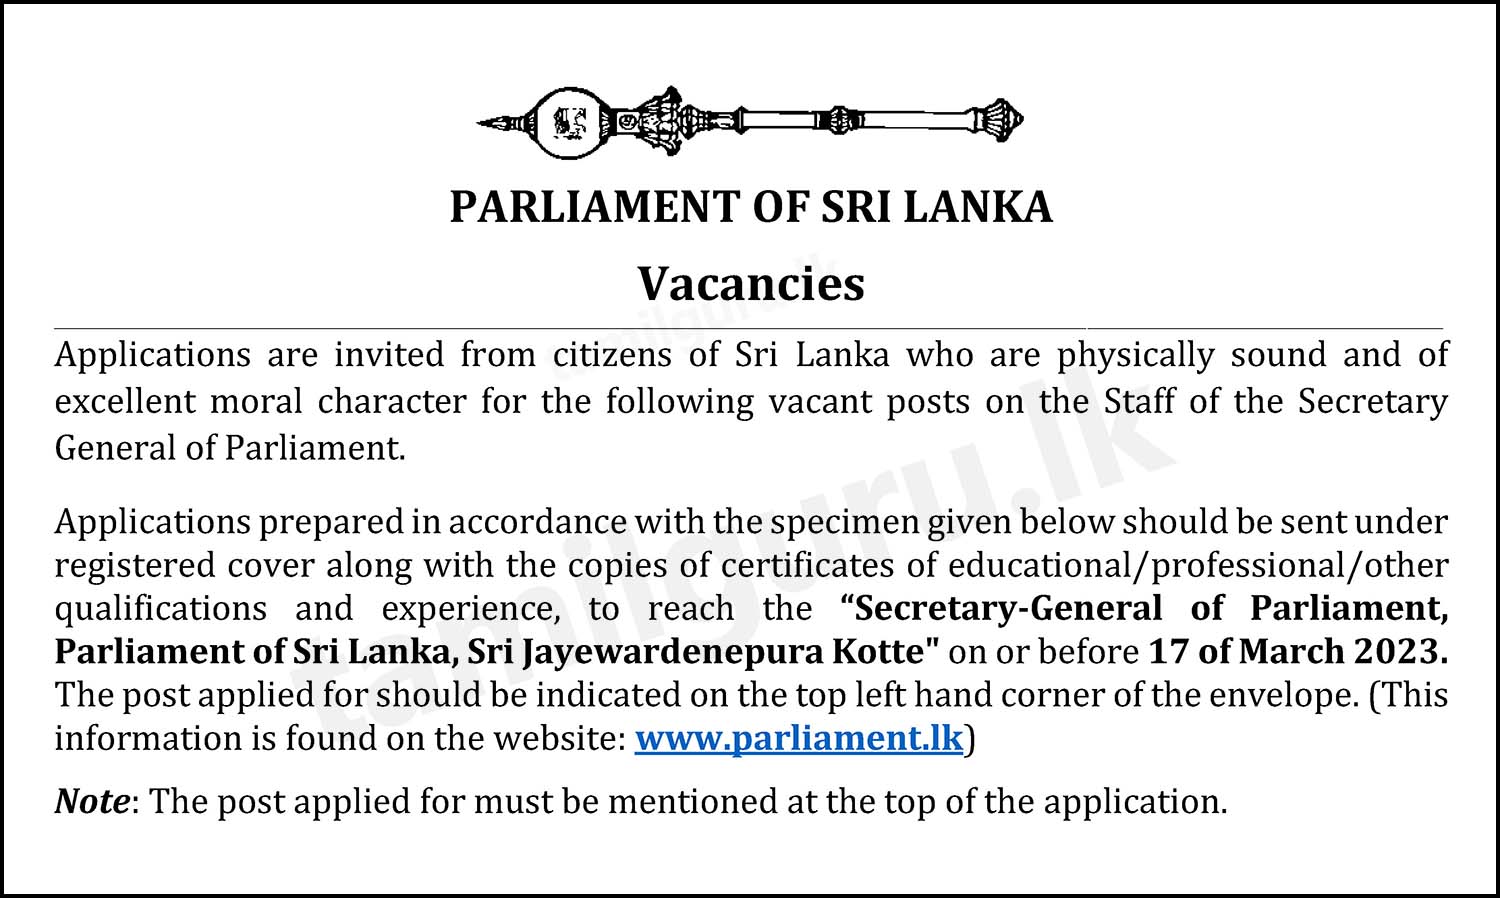 Parliament of Sri Lanka (Vacancies) - Receptionist, Security Officer, Mason, Carpenter, Painter, Pipe Line Cleaner, Plumber